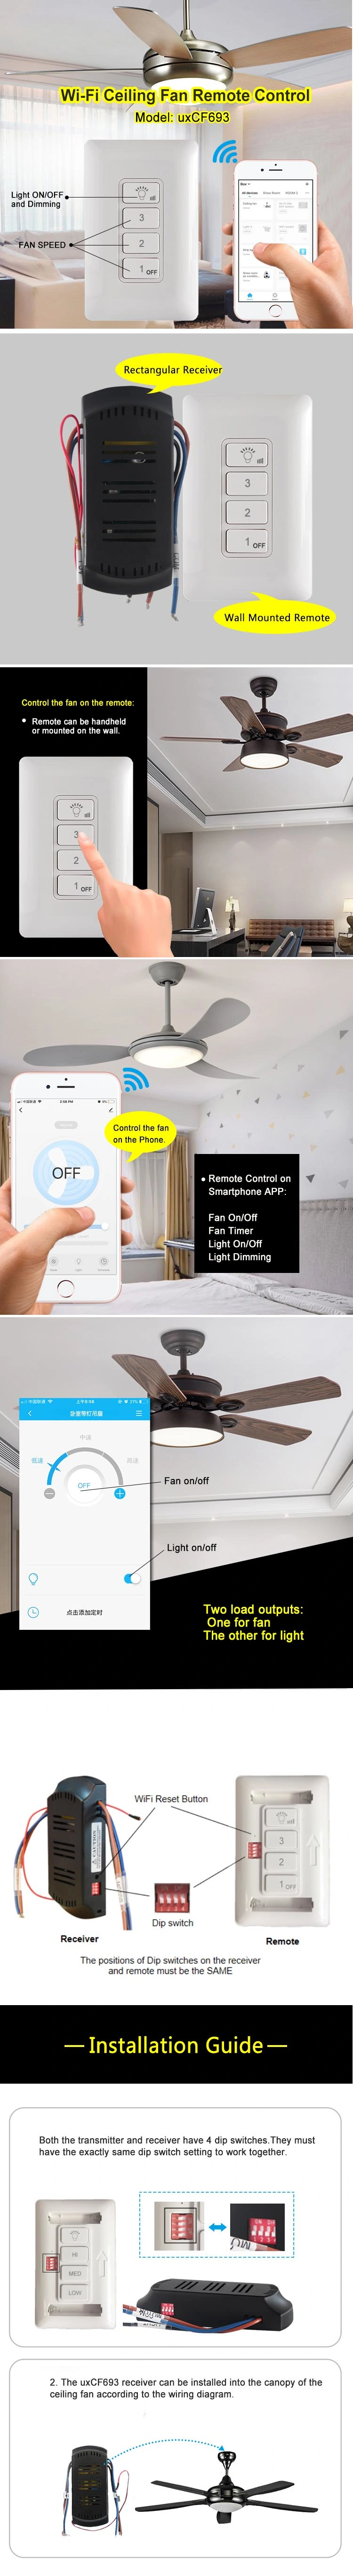 Remote Control for Ceiling Fan with Dimming Function WiFi Connection